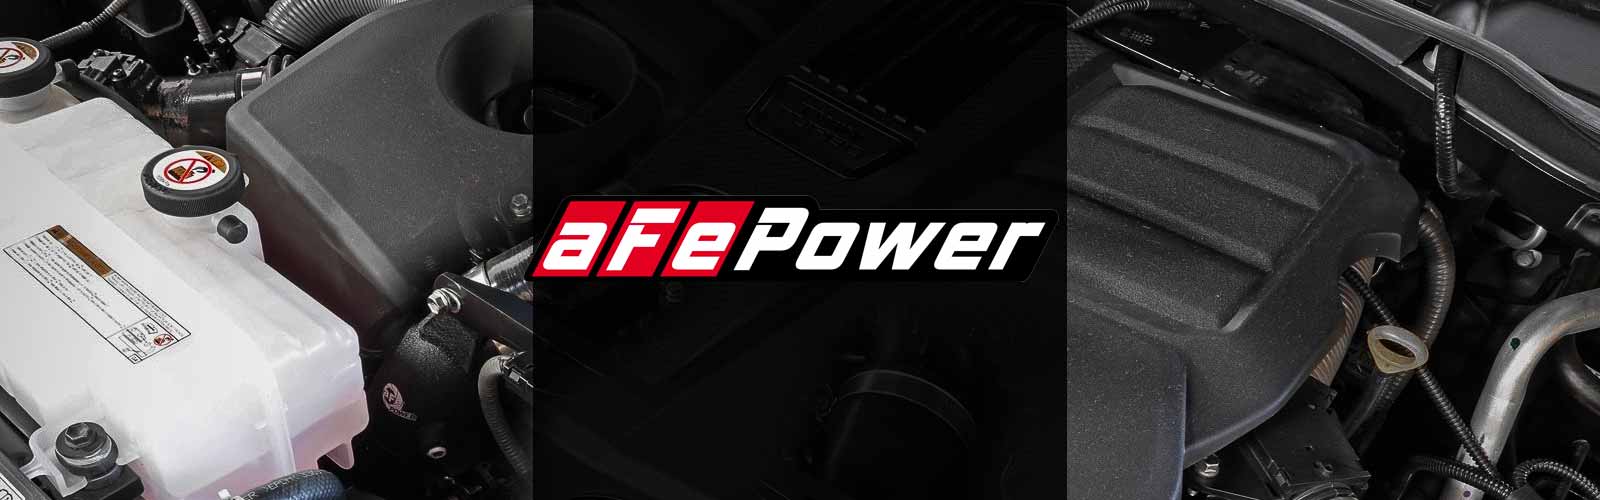 AFE Power parts and accessories for the Toyota Tundra, Tacoma, 4runner, GR Supra, GR86 and more.